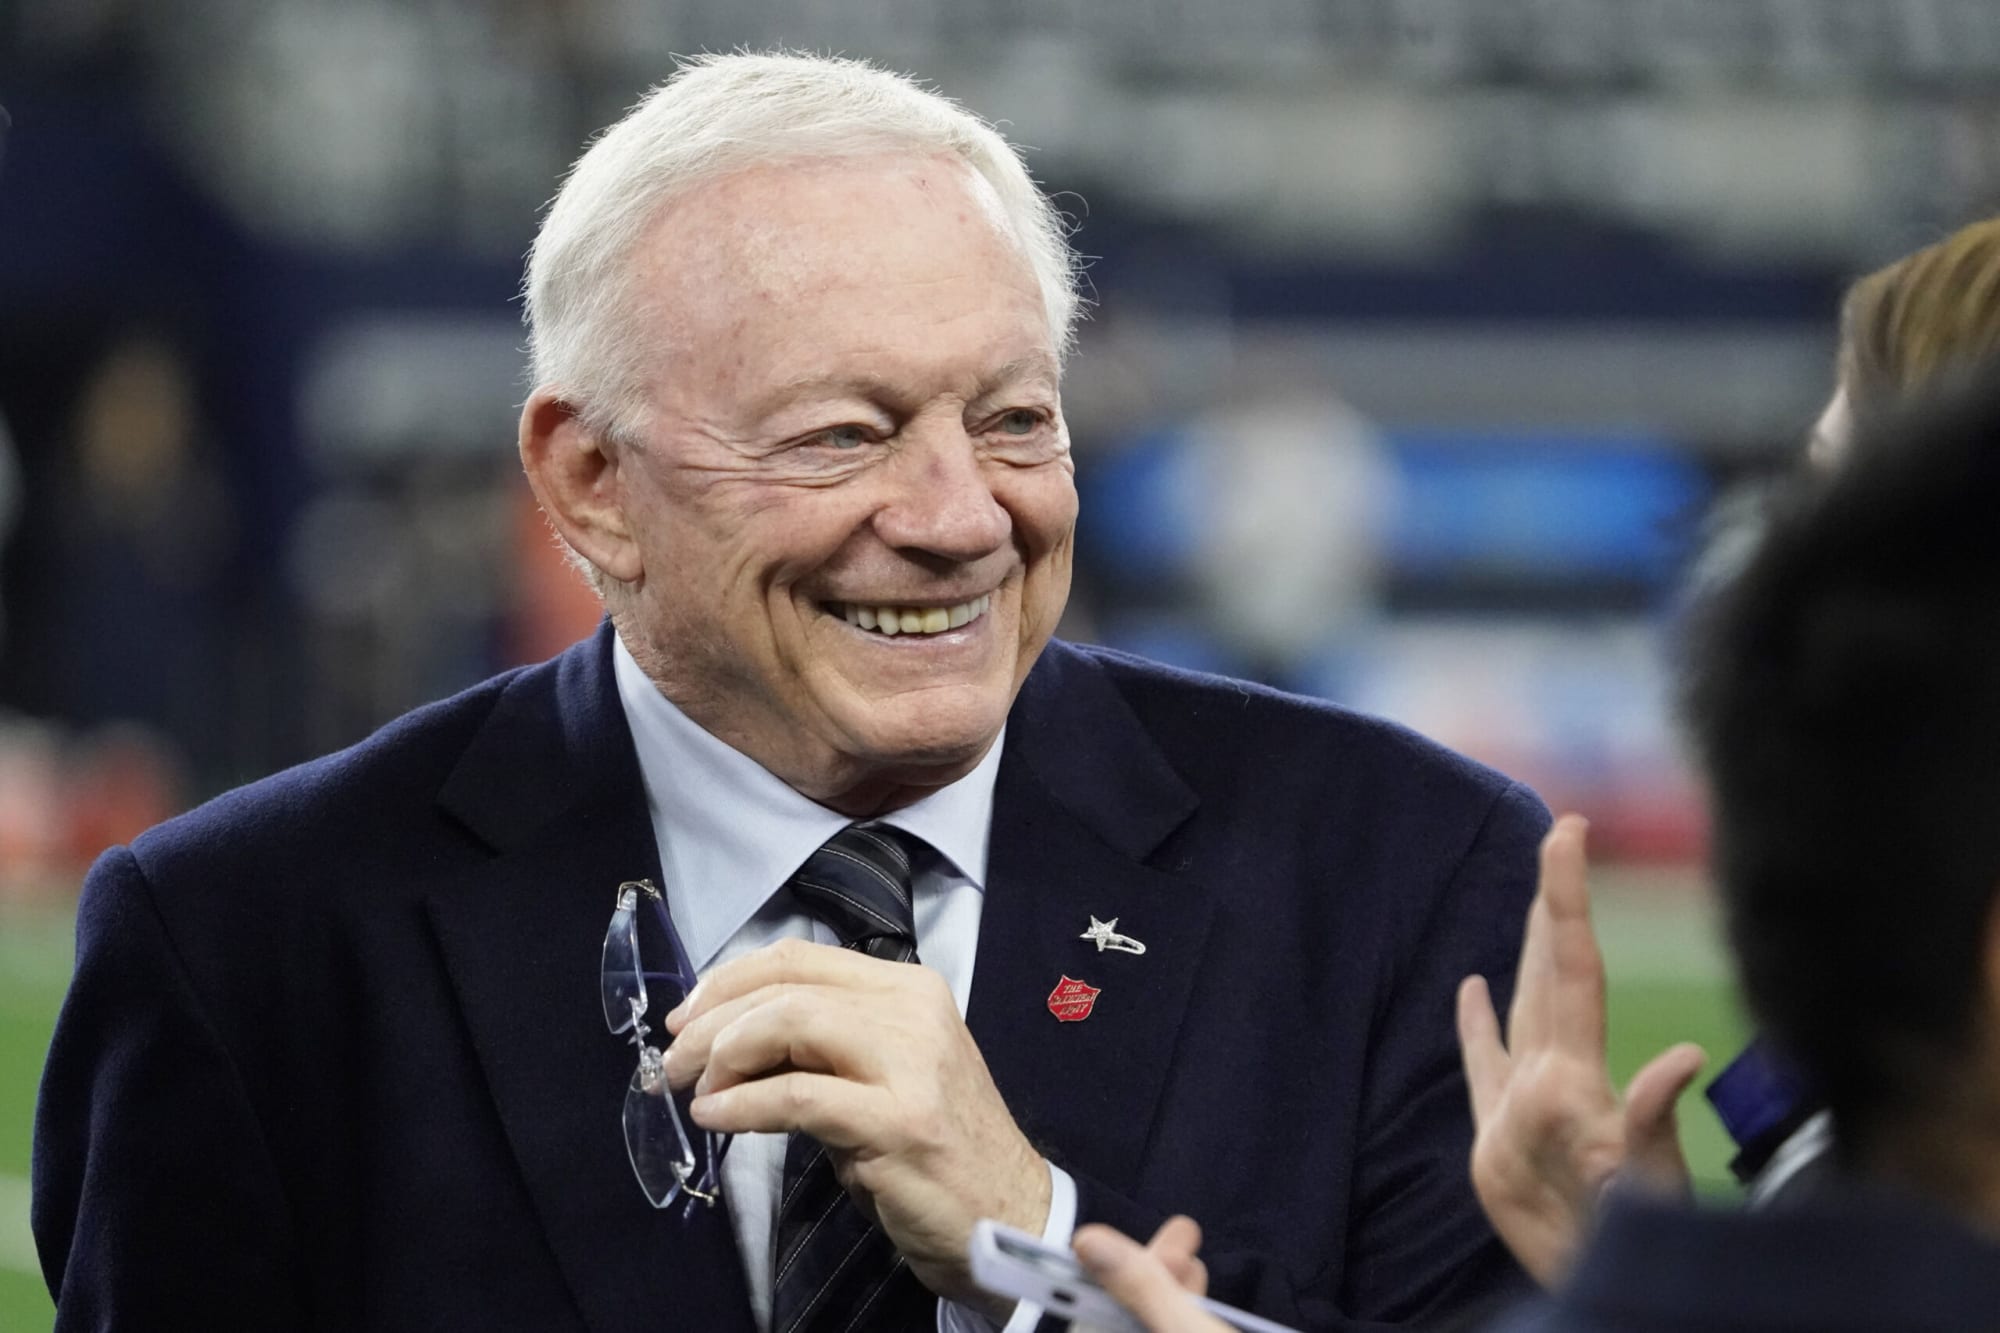 Jerry Jones just threw Mike McCarthy all the way under the bus